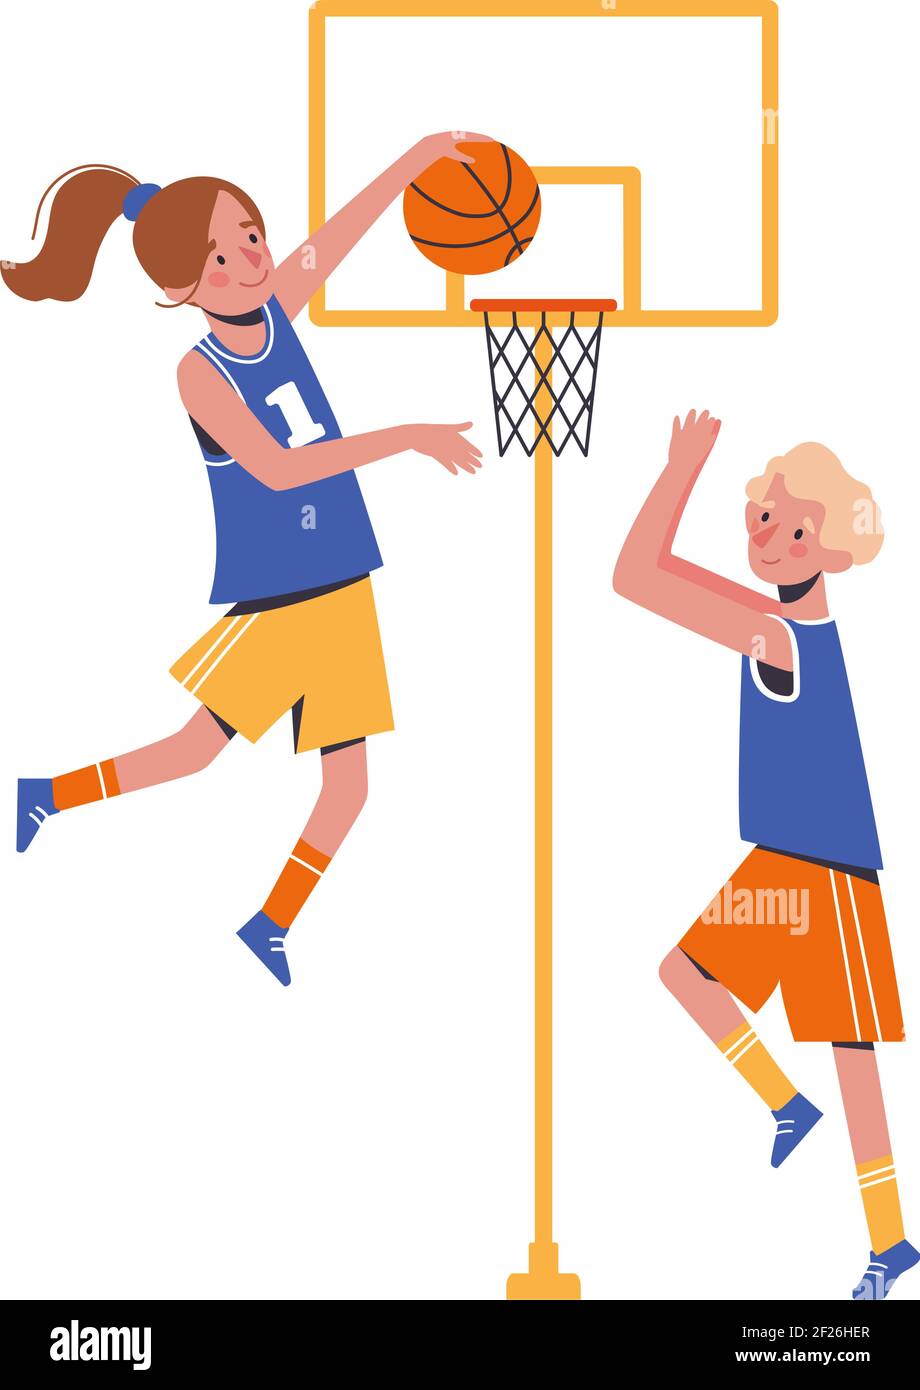 Childrens sports basketball. Flat design concept with funny kids playing ball. Vector illustration of boys and girls, set isolated on white background. Stock Vector